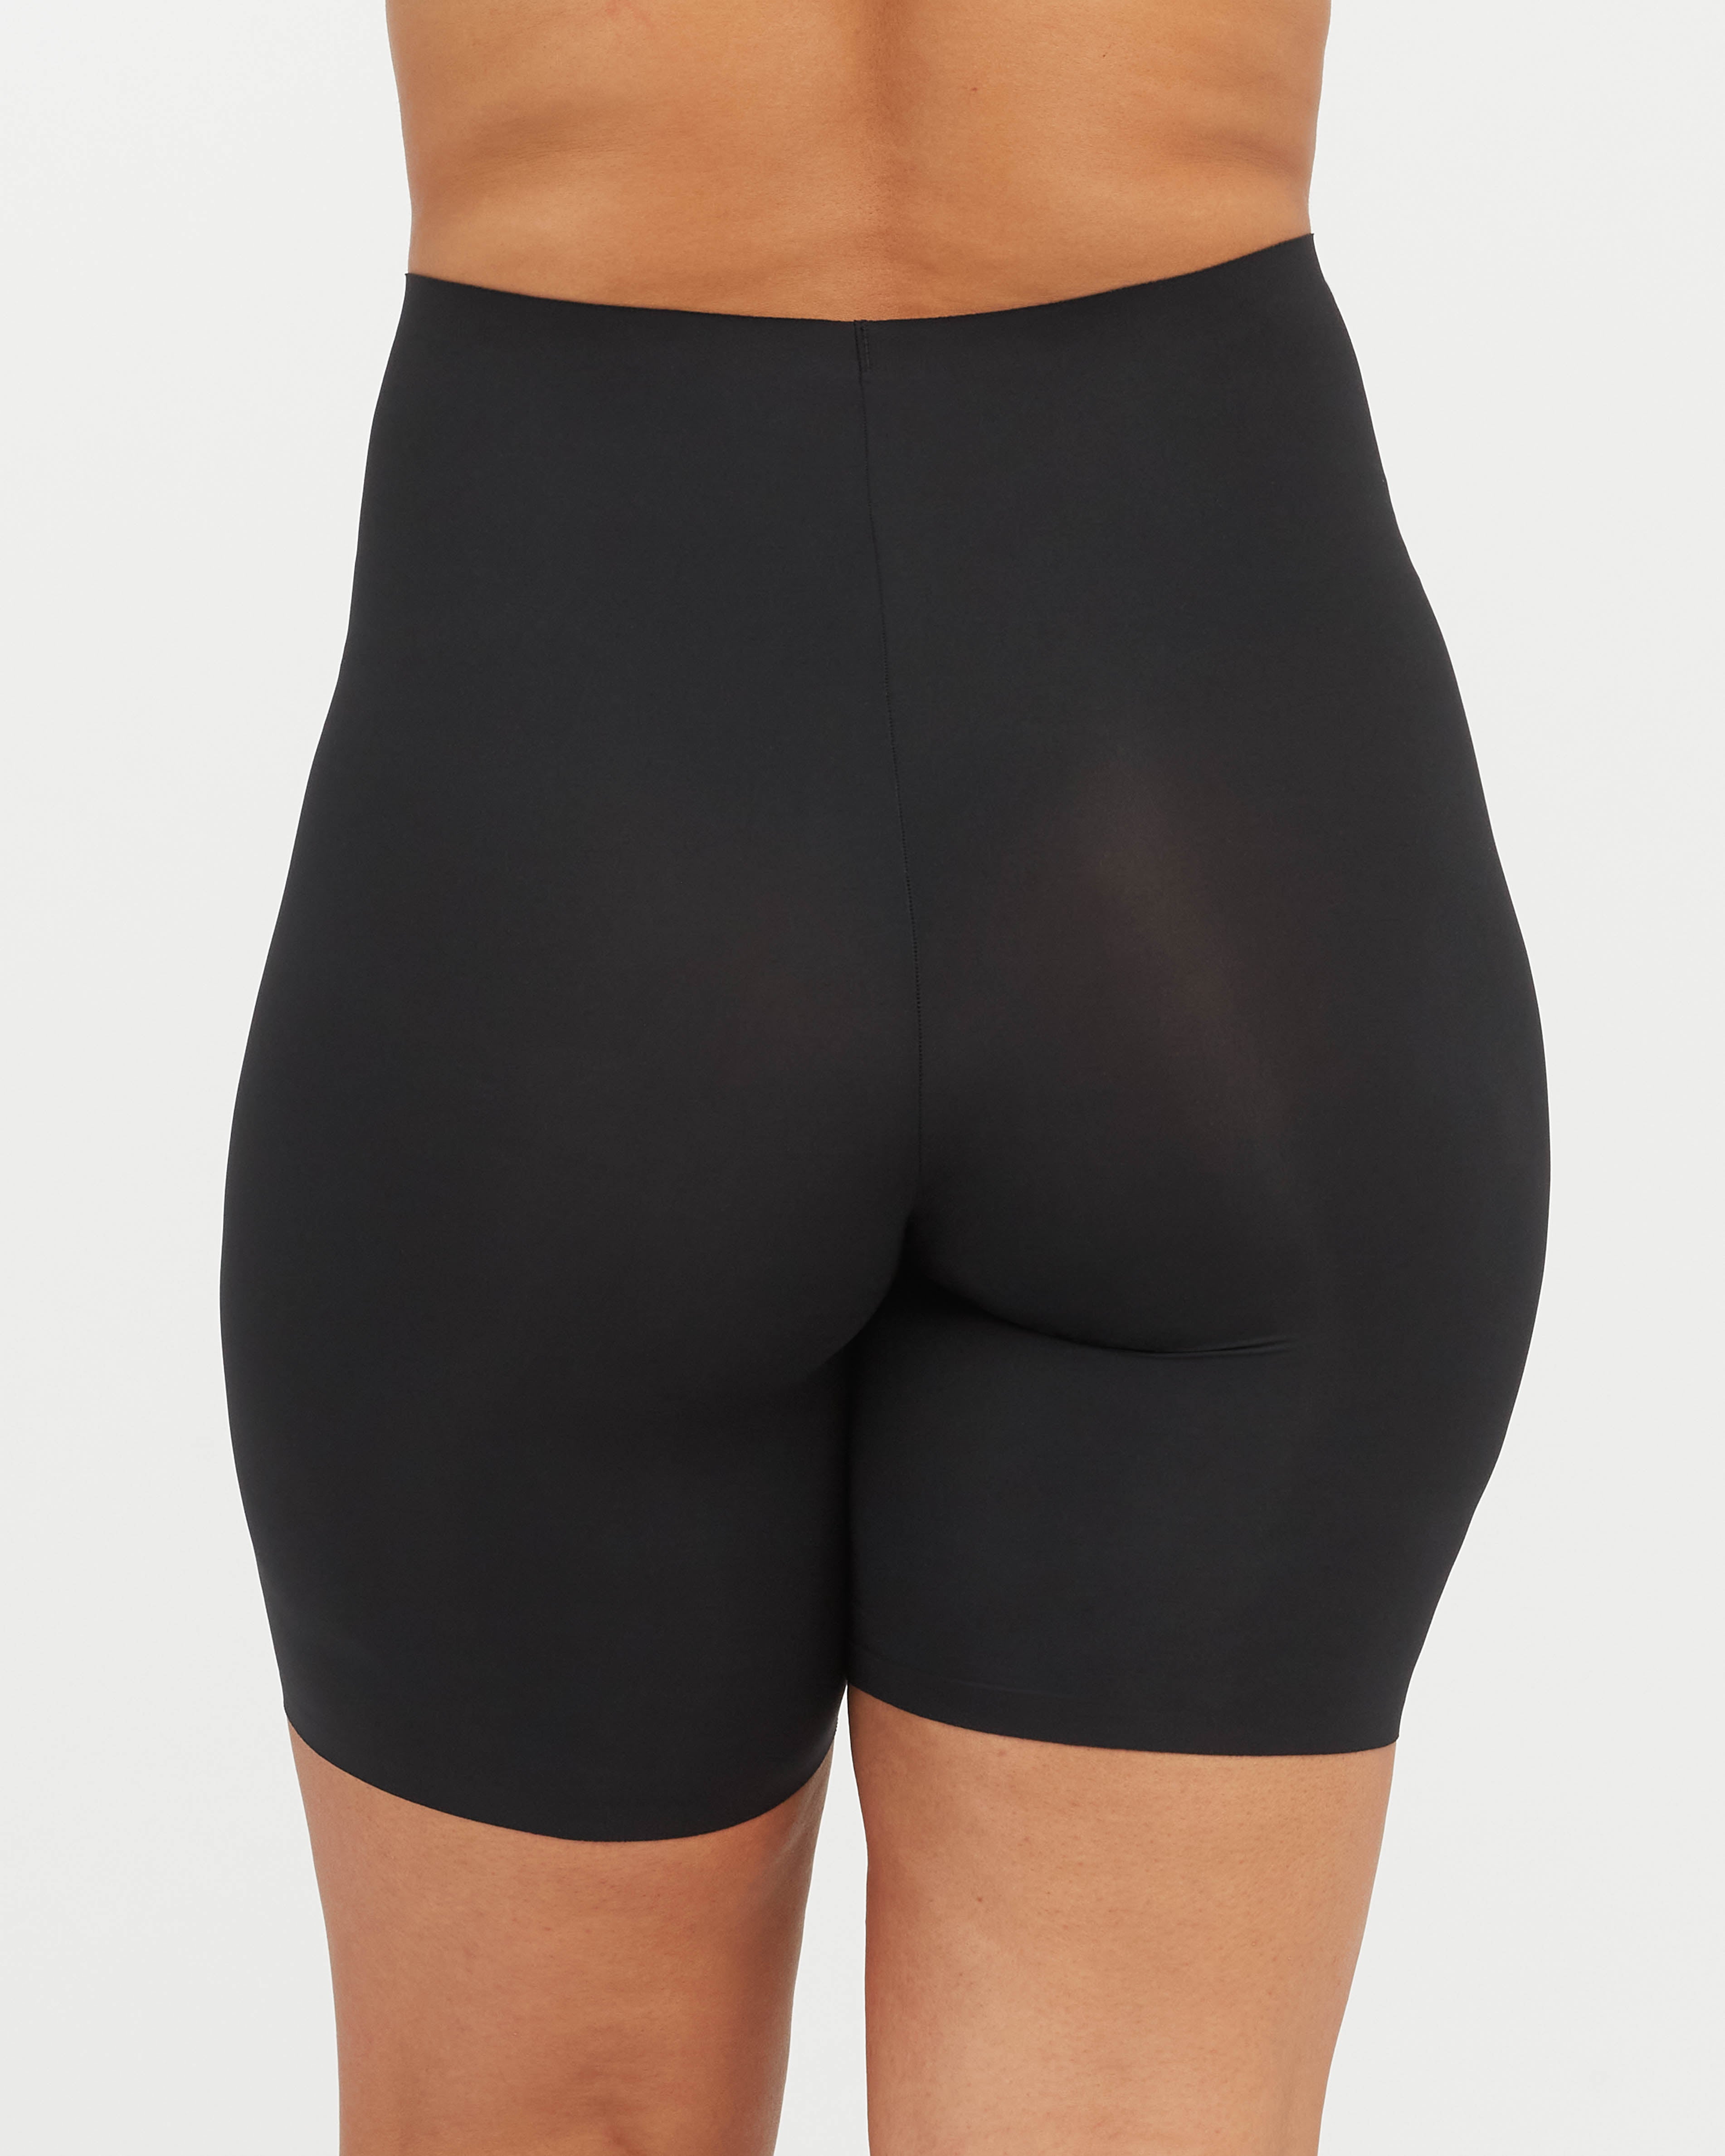 Spanx Firm Control Everyday Shaping Shorts, £30.00